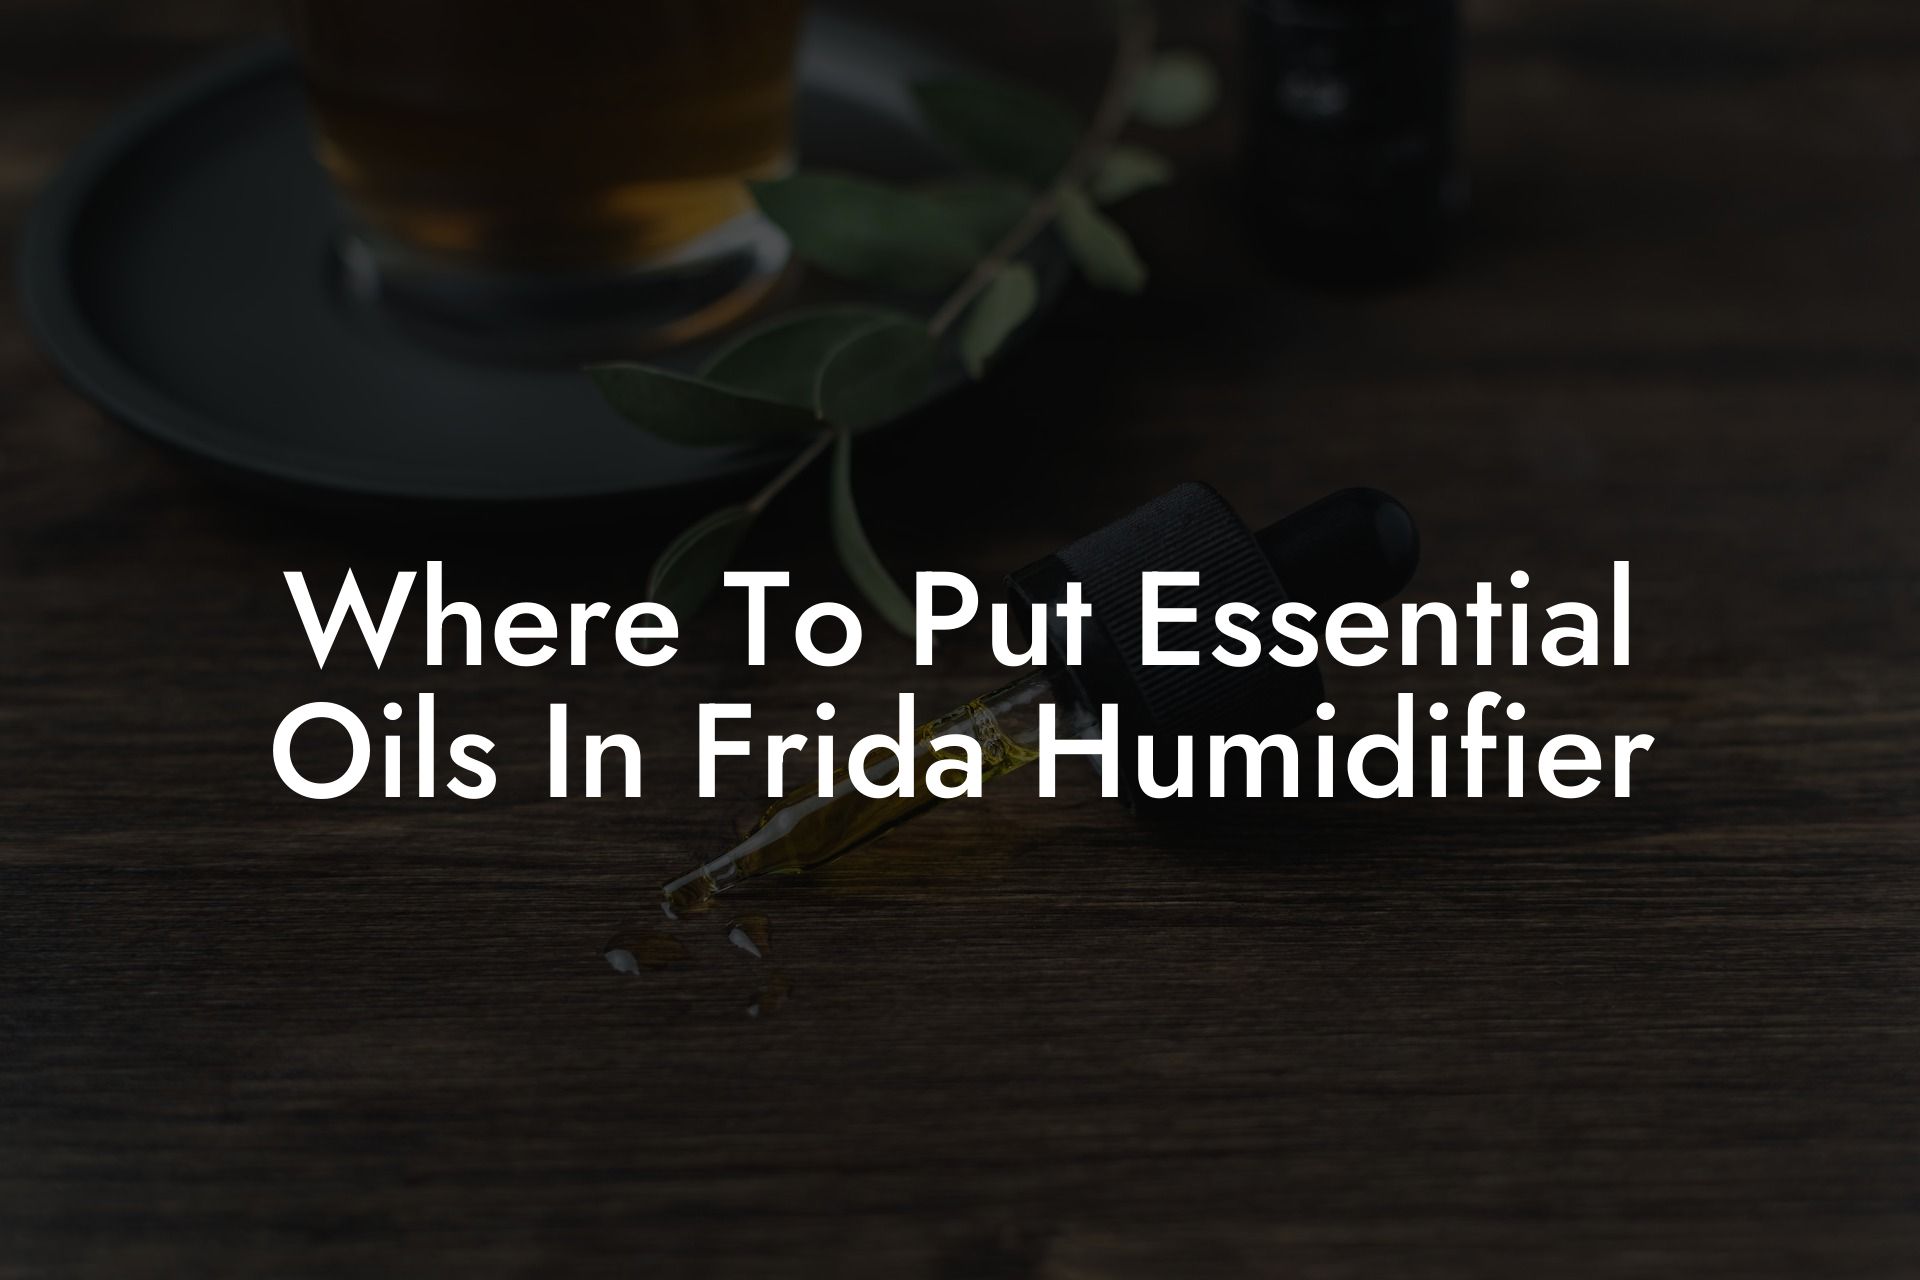 Where To Put Essential Oils In Frida Humidifier